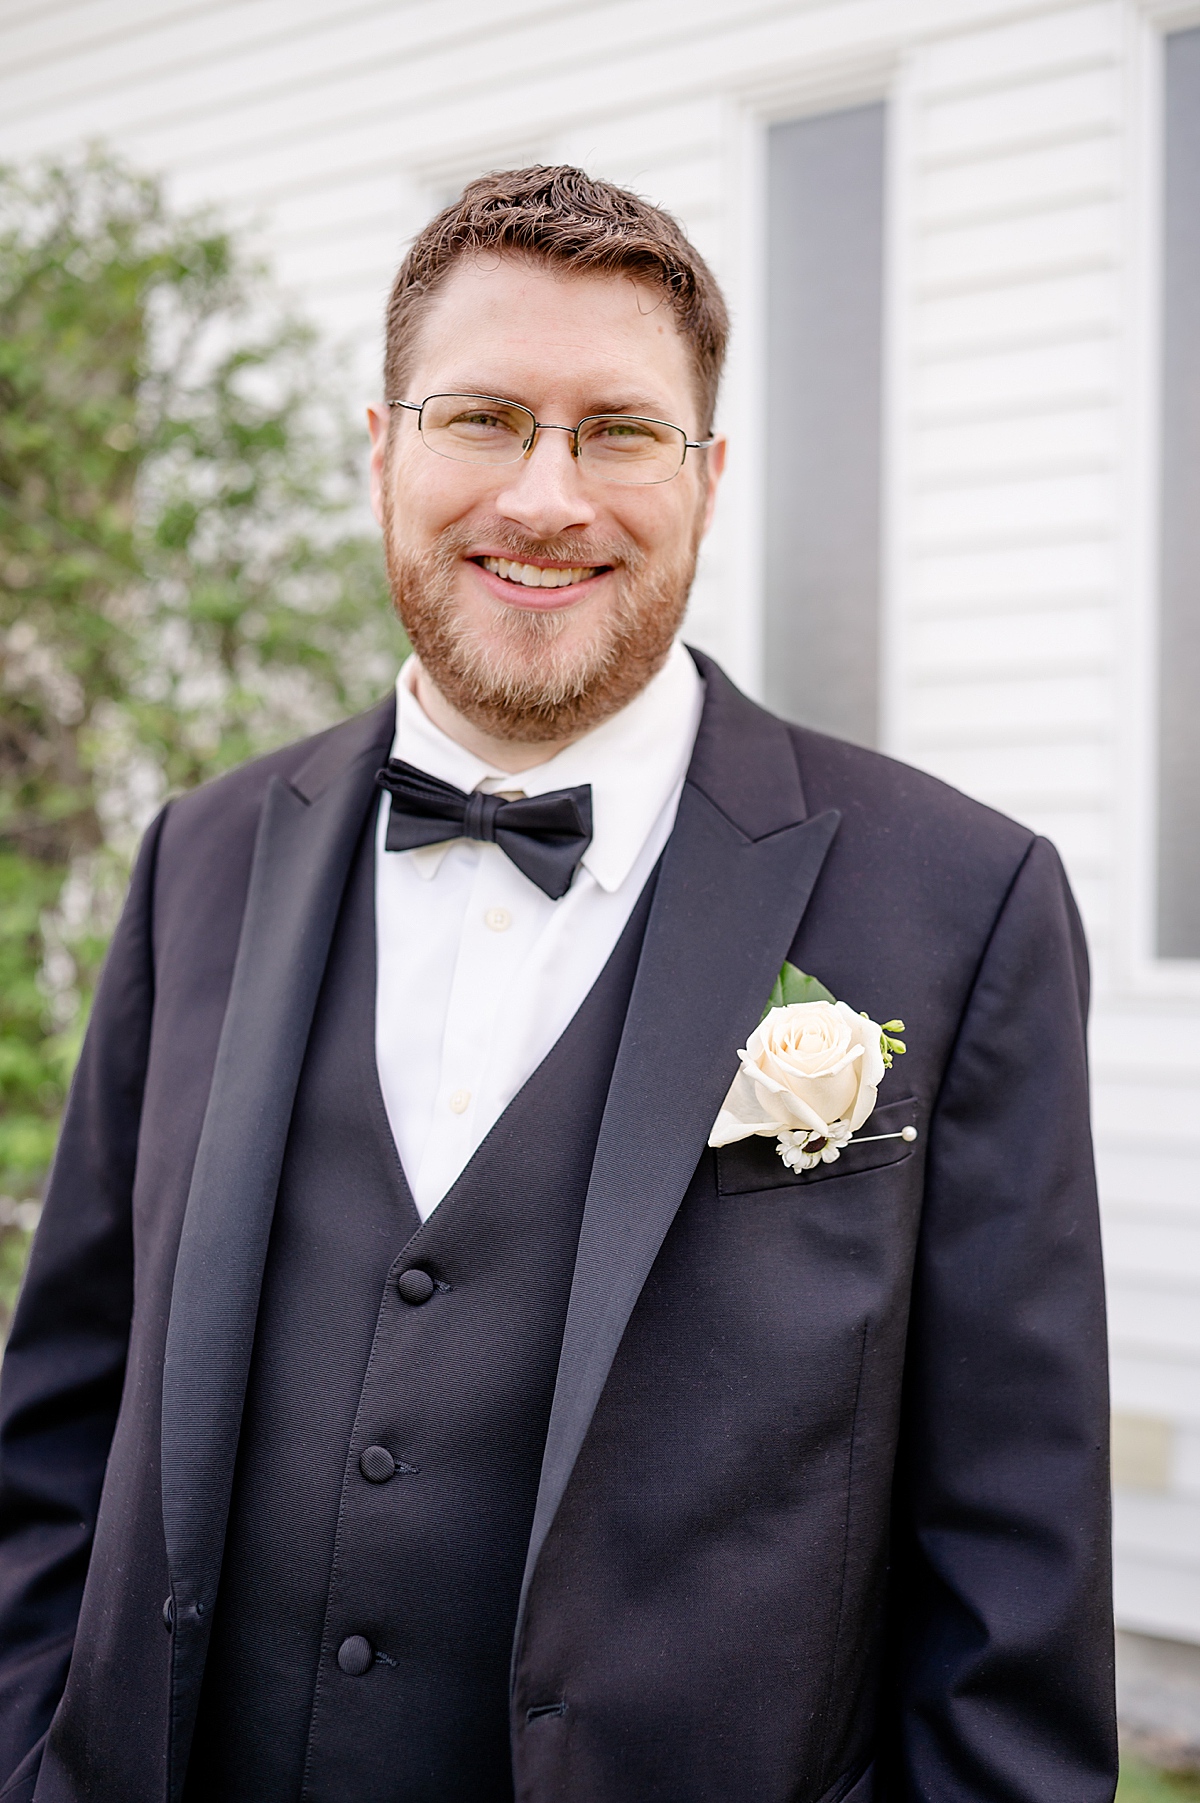 Portrait of the groom standing in front of a white church.